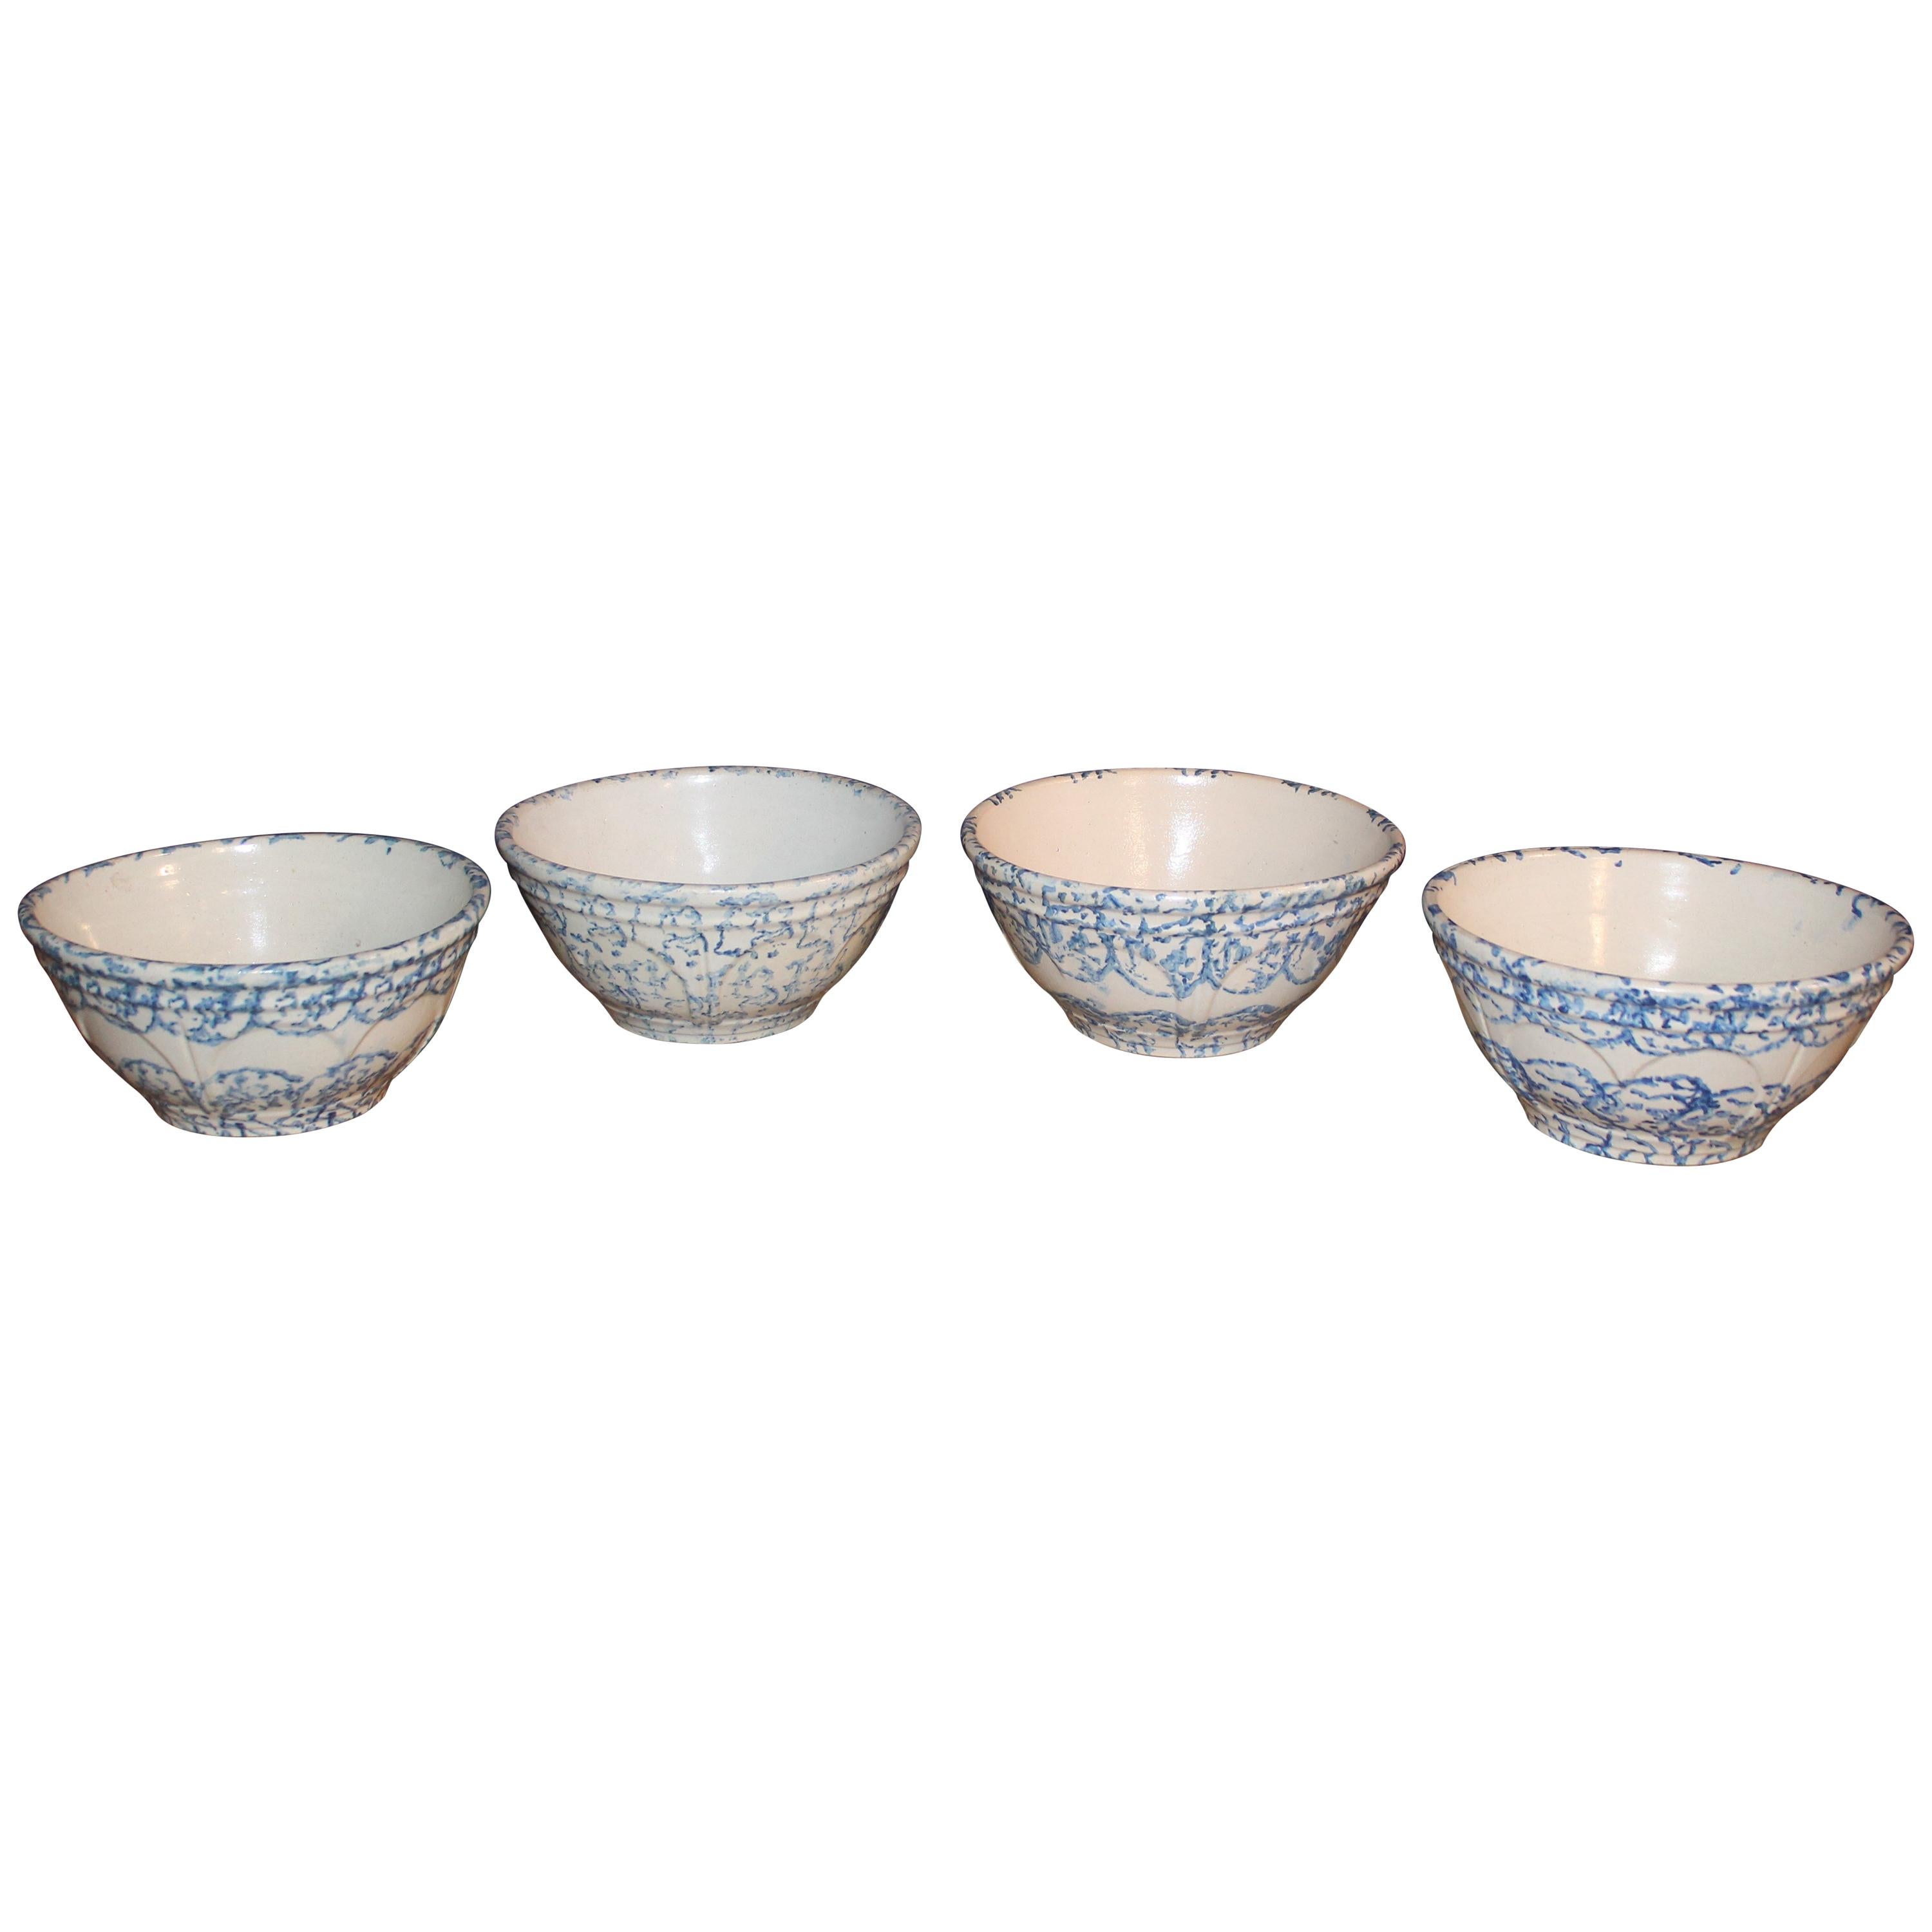 19th Century Sponge Ware Mixing Bowls / Collection of Four